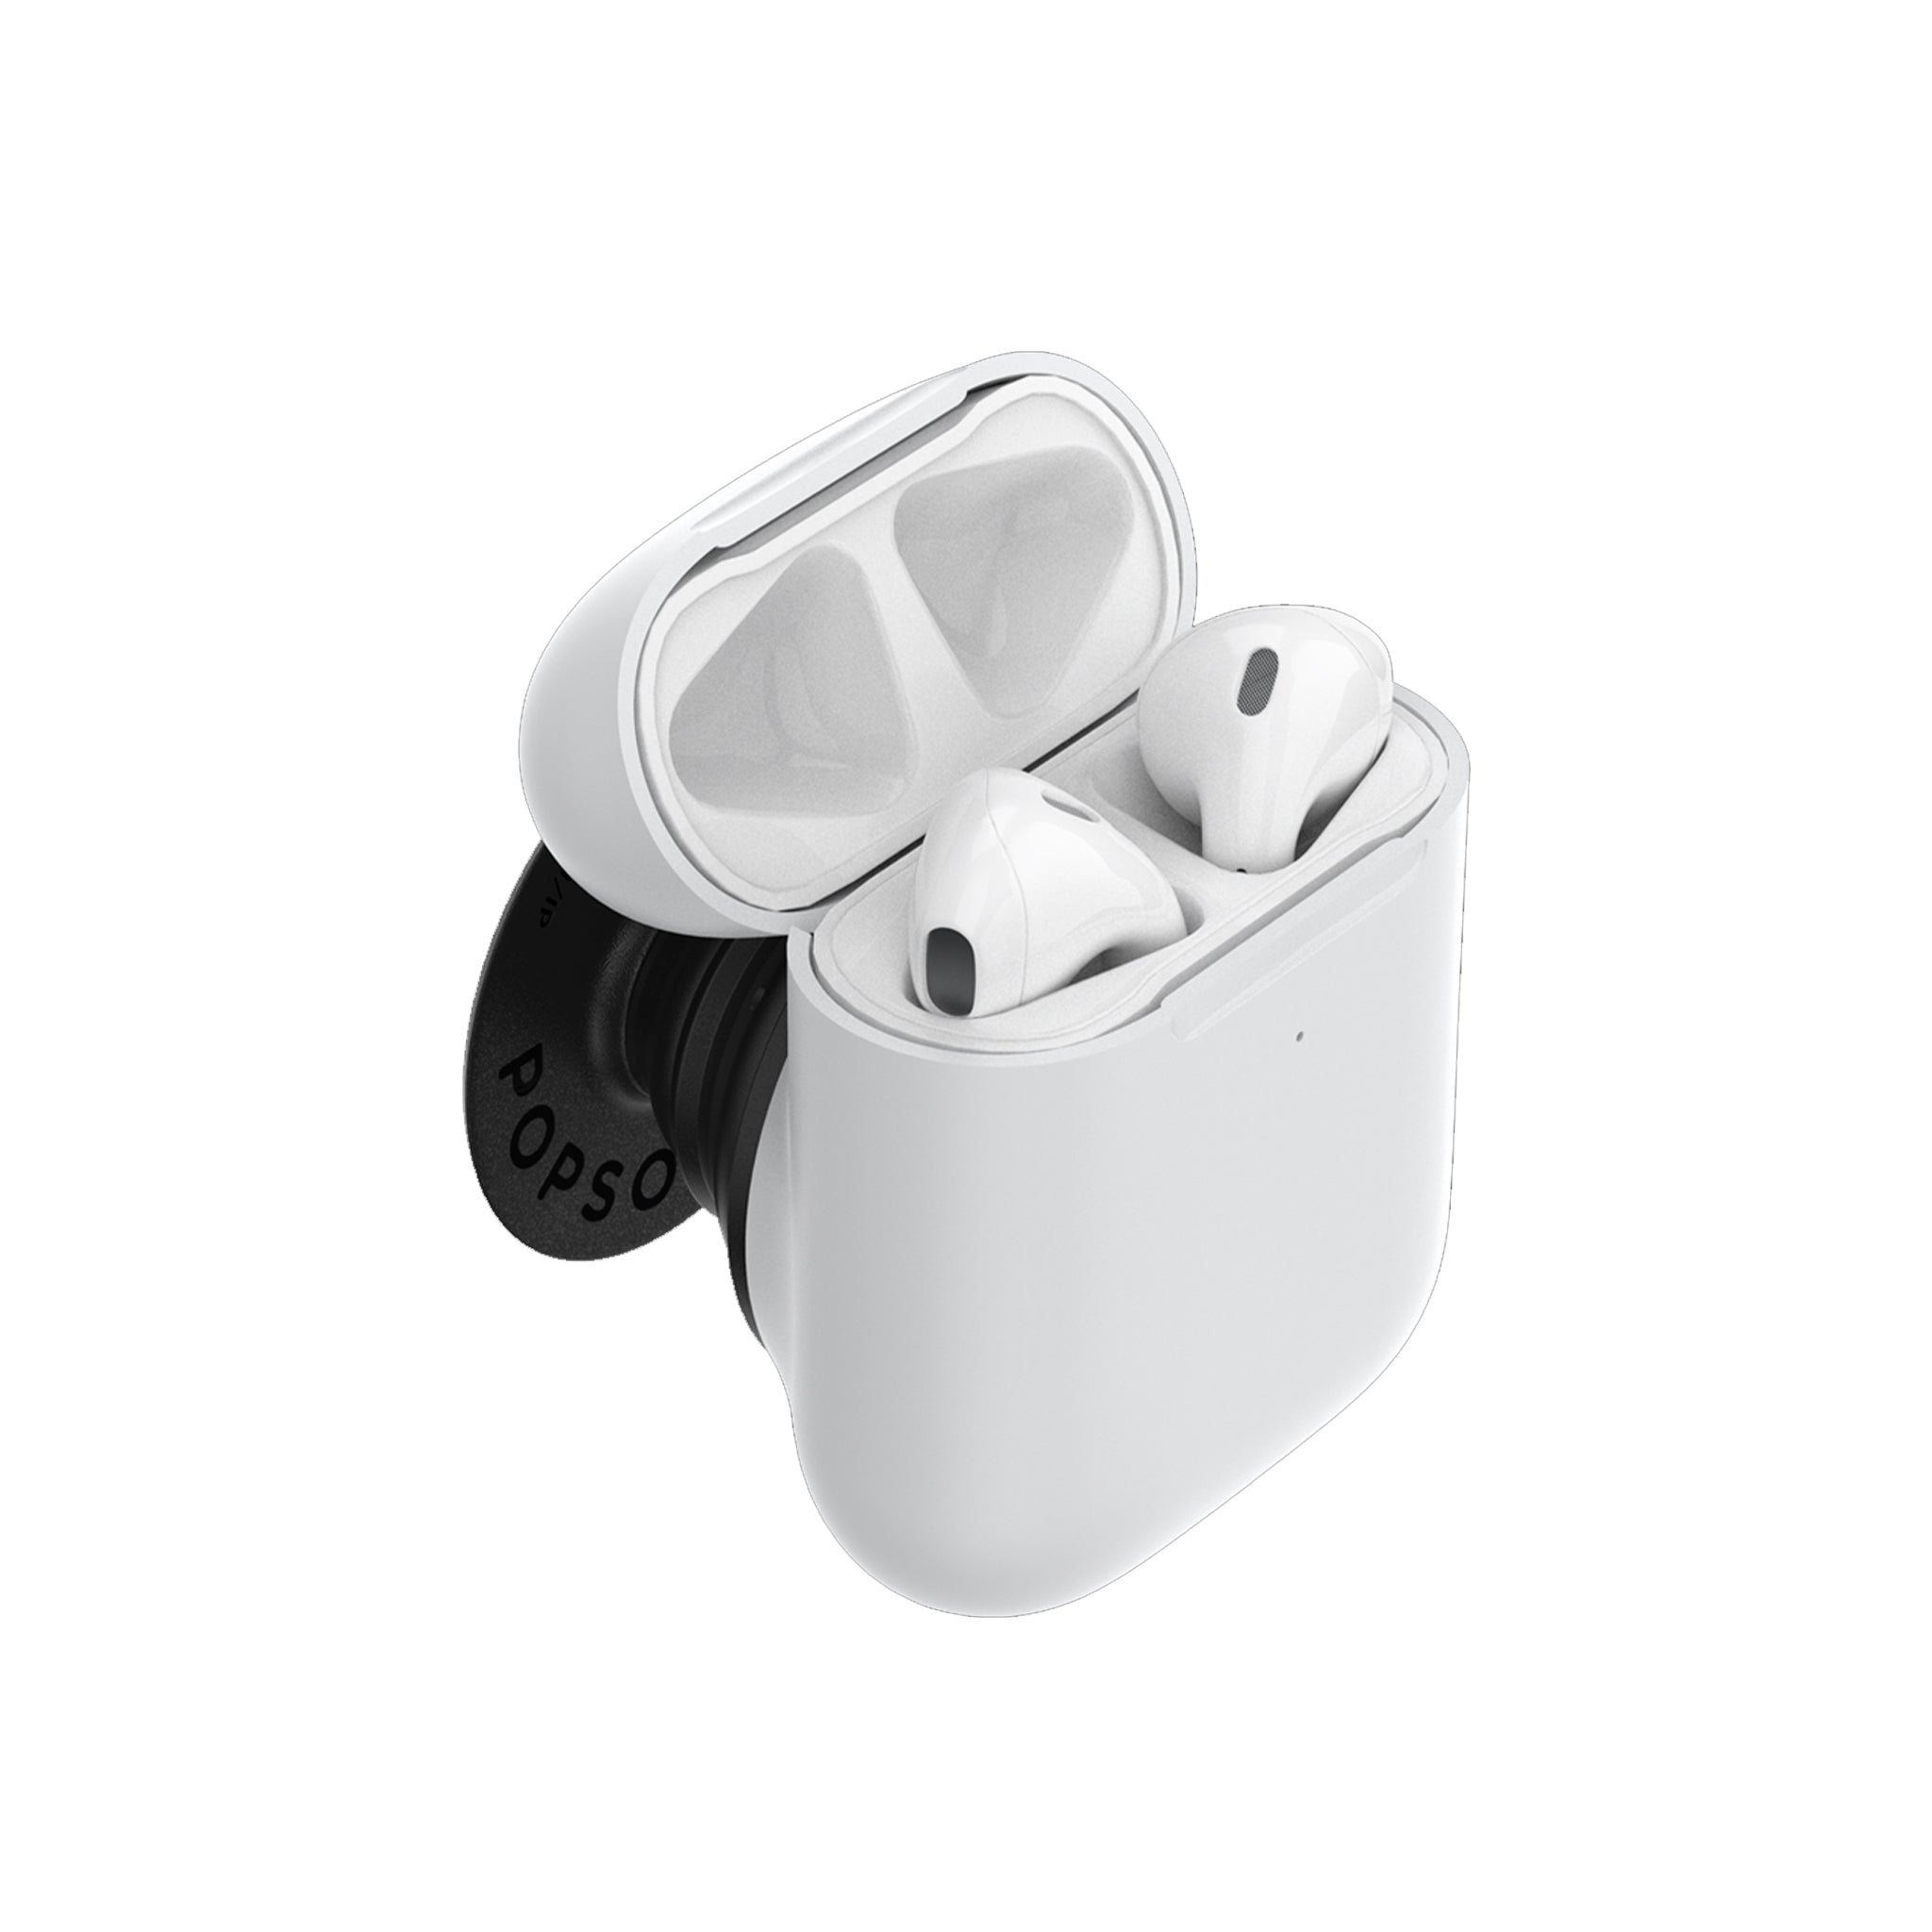 Popsockets - Popgrip Swappable Airpods Holder Device Stand And Grip - White